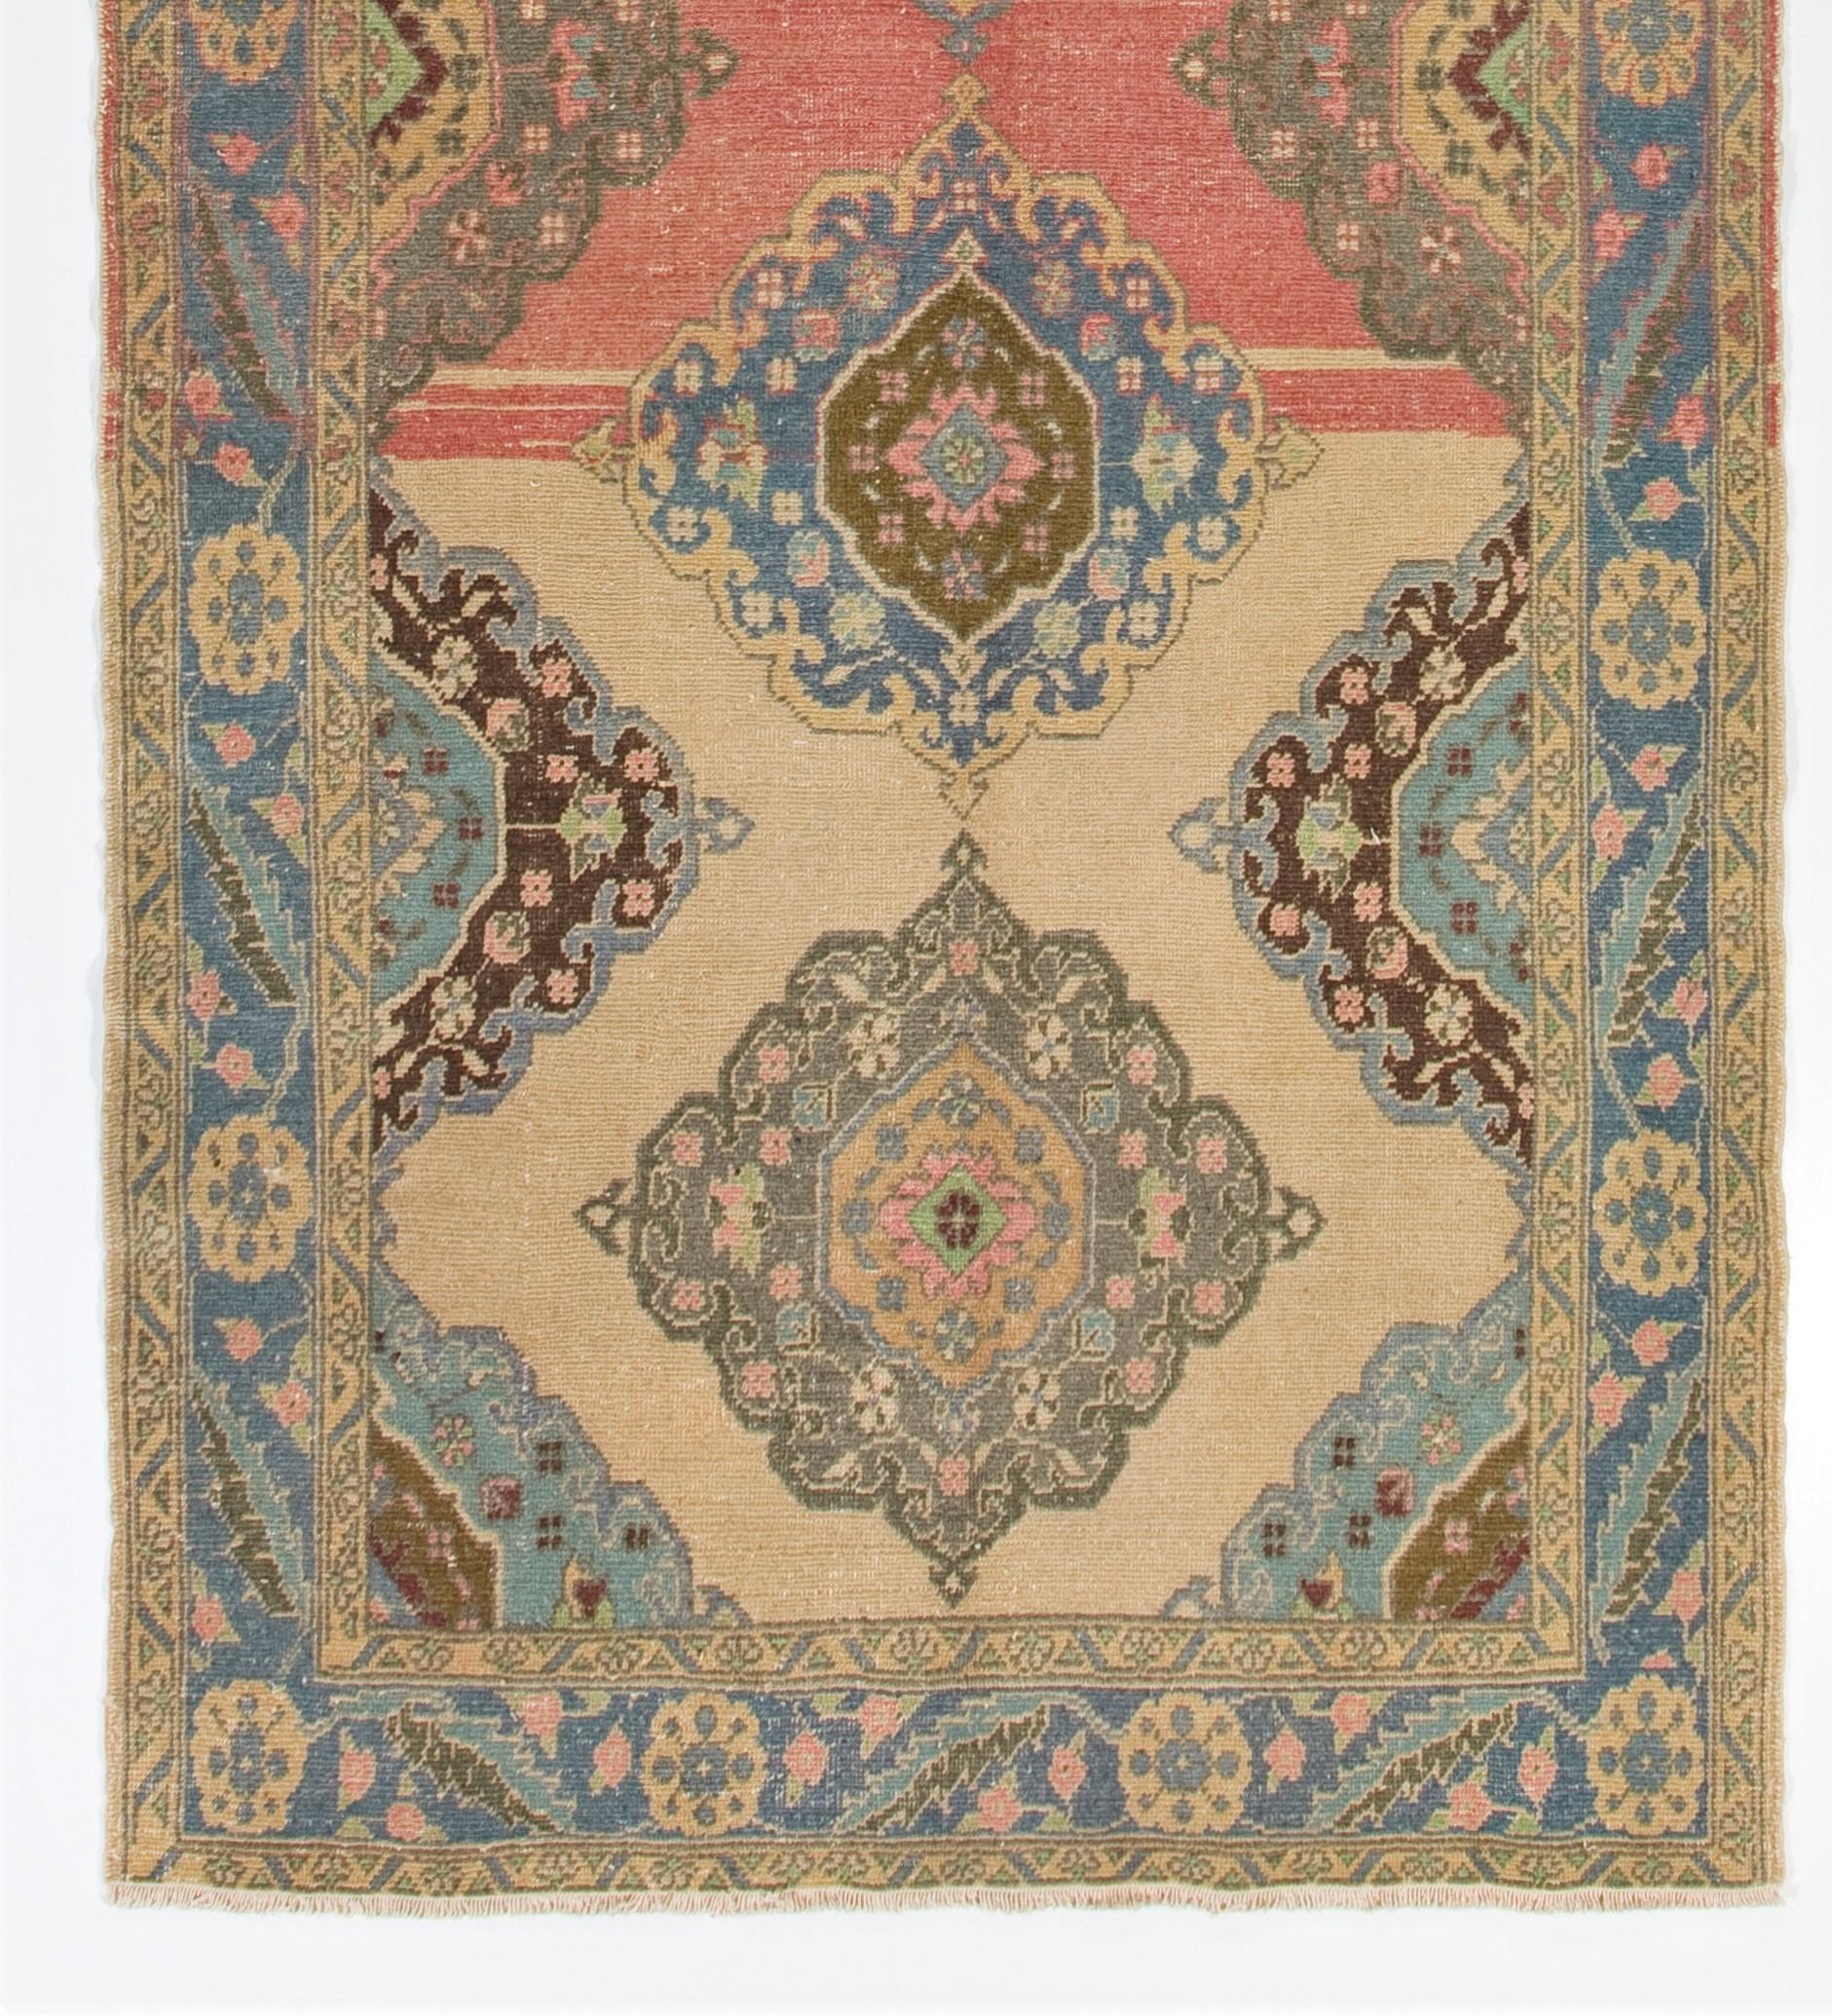 An early 20th century hand knotted runner rug from Central Anatolia with pleasing natural colors and wool pile on wool foundation. Measures: 5 x 12.6 ft.
Very good condition. Sturdy and as clean as a brand new rug (deep washed professionally).